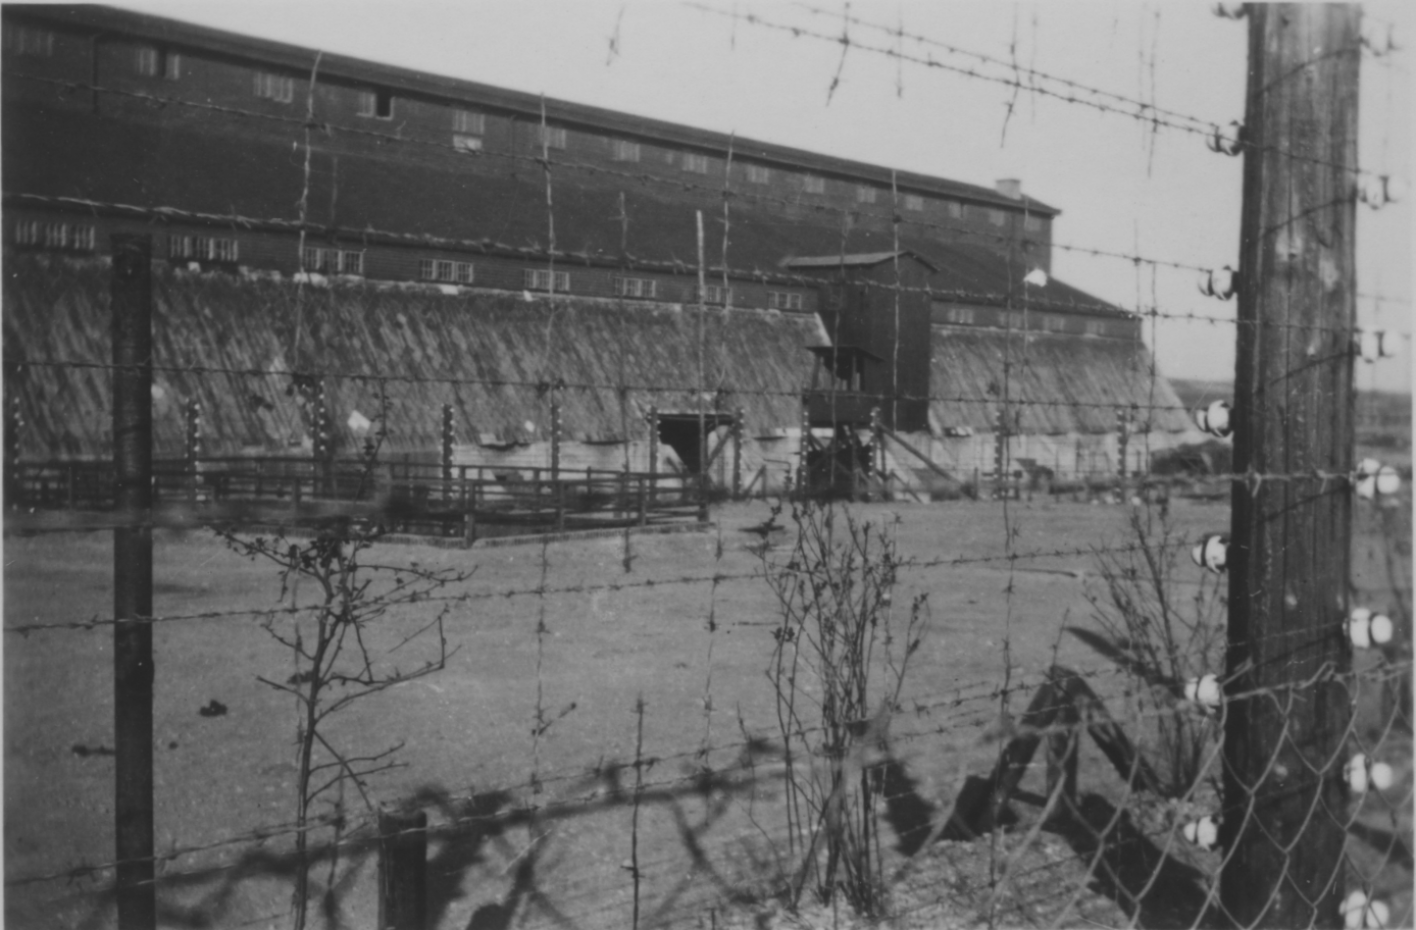 View through the barbed wire fence to the field barn converted into prisoner accommodation.